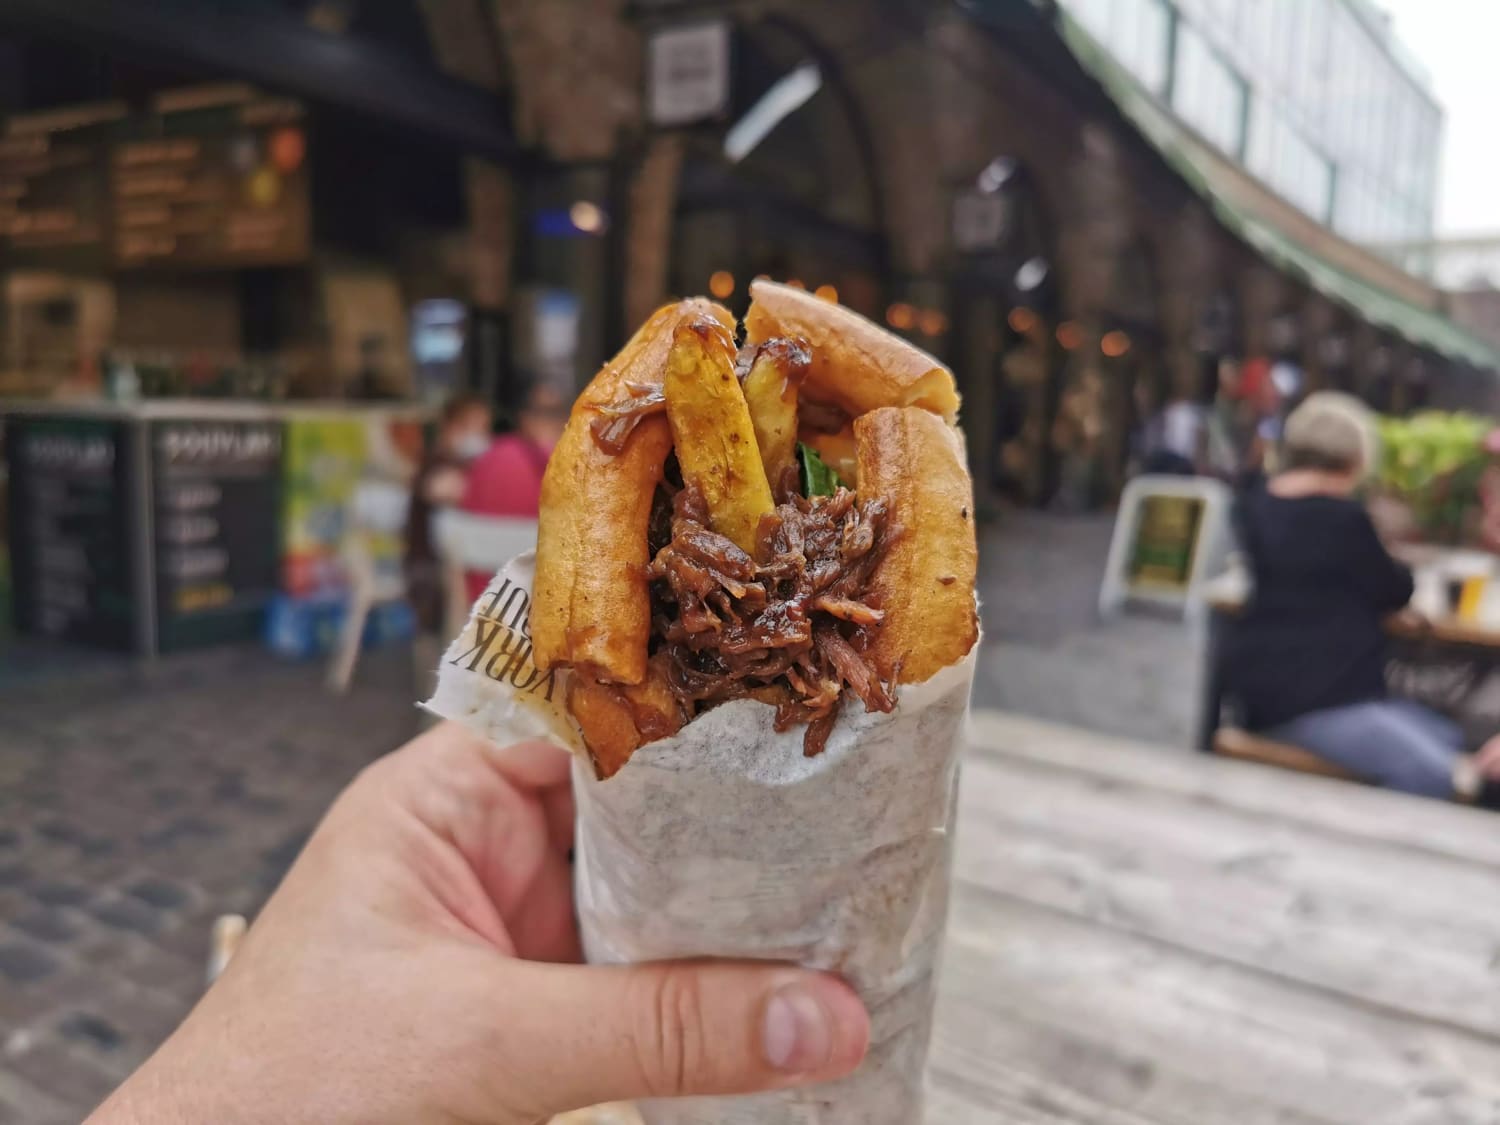 [I Ate] The Most British Street Food Imaginable: Yorkshire Burrito (Sunday Roast Wrapped In a Giant Yorkshire Pudding)